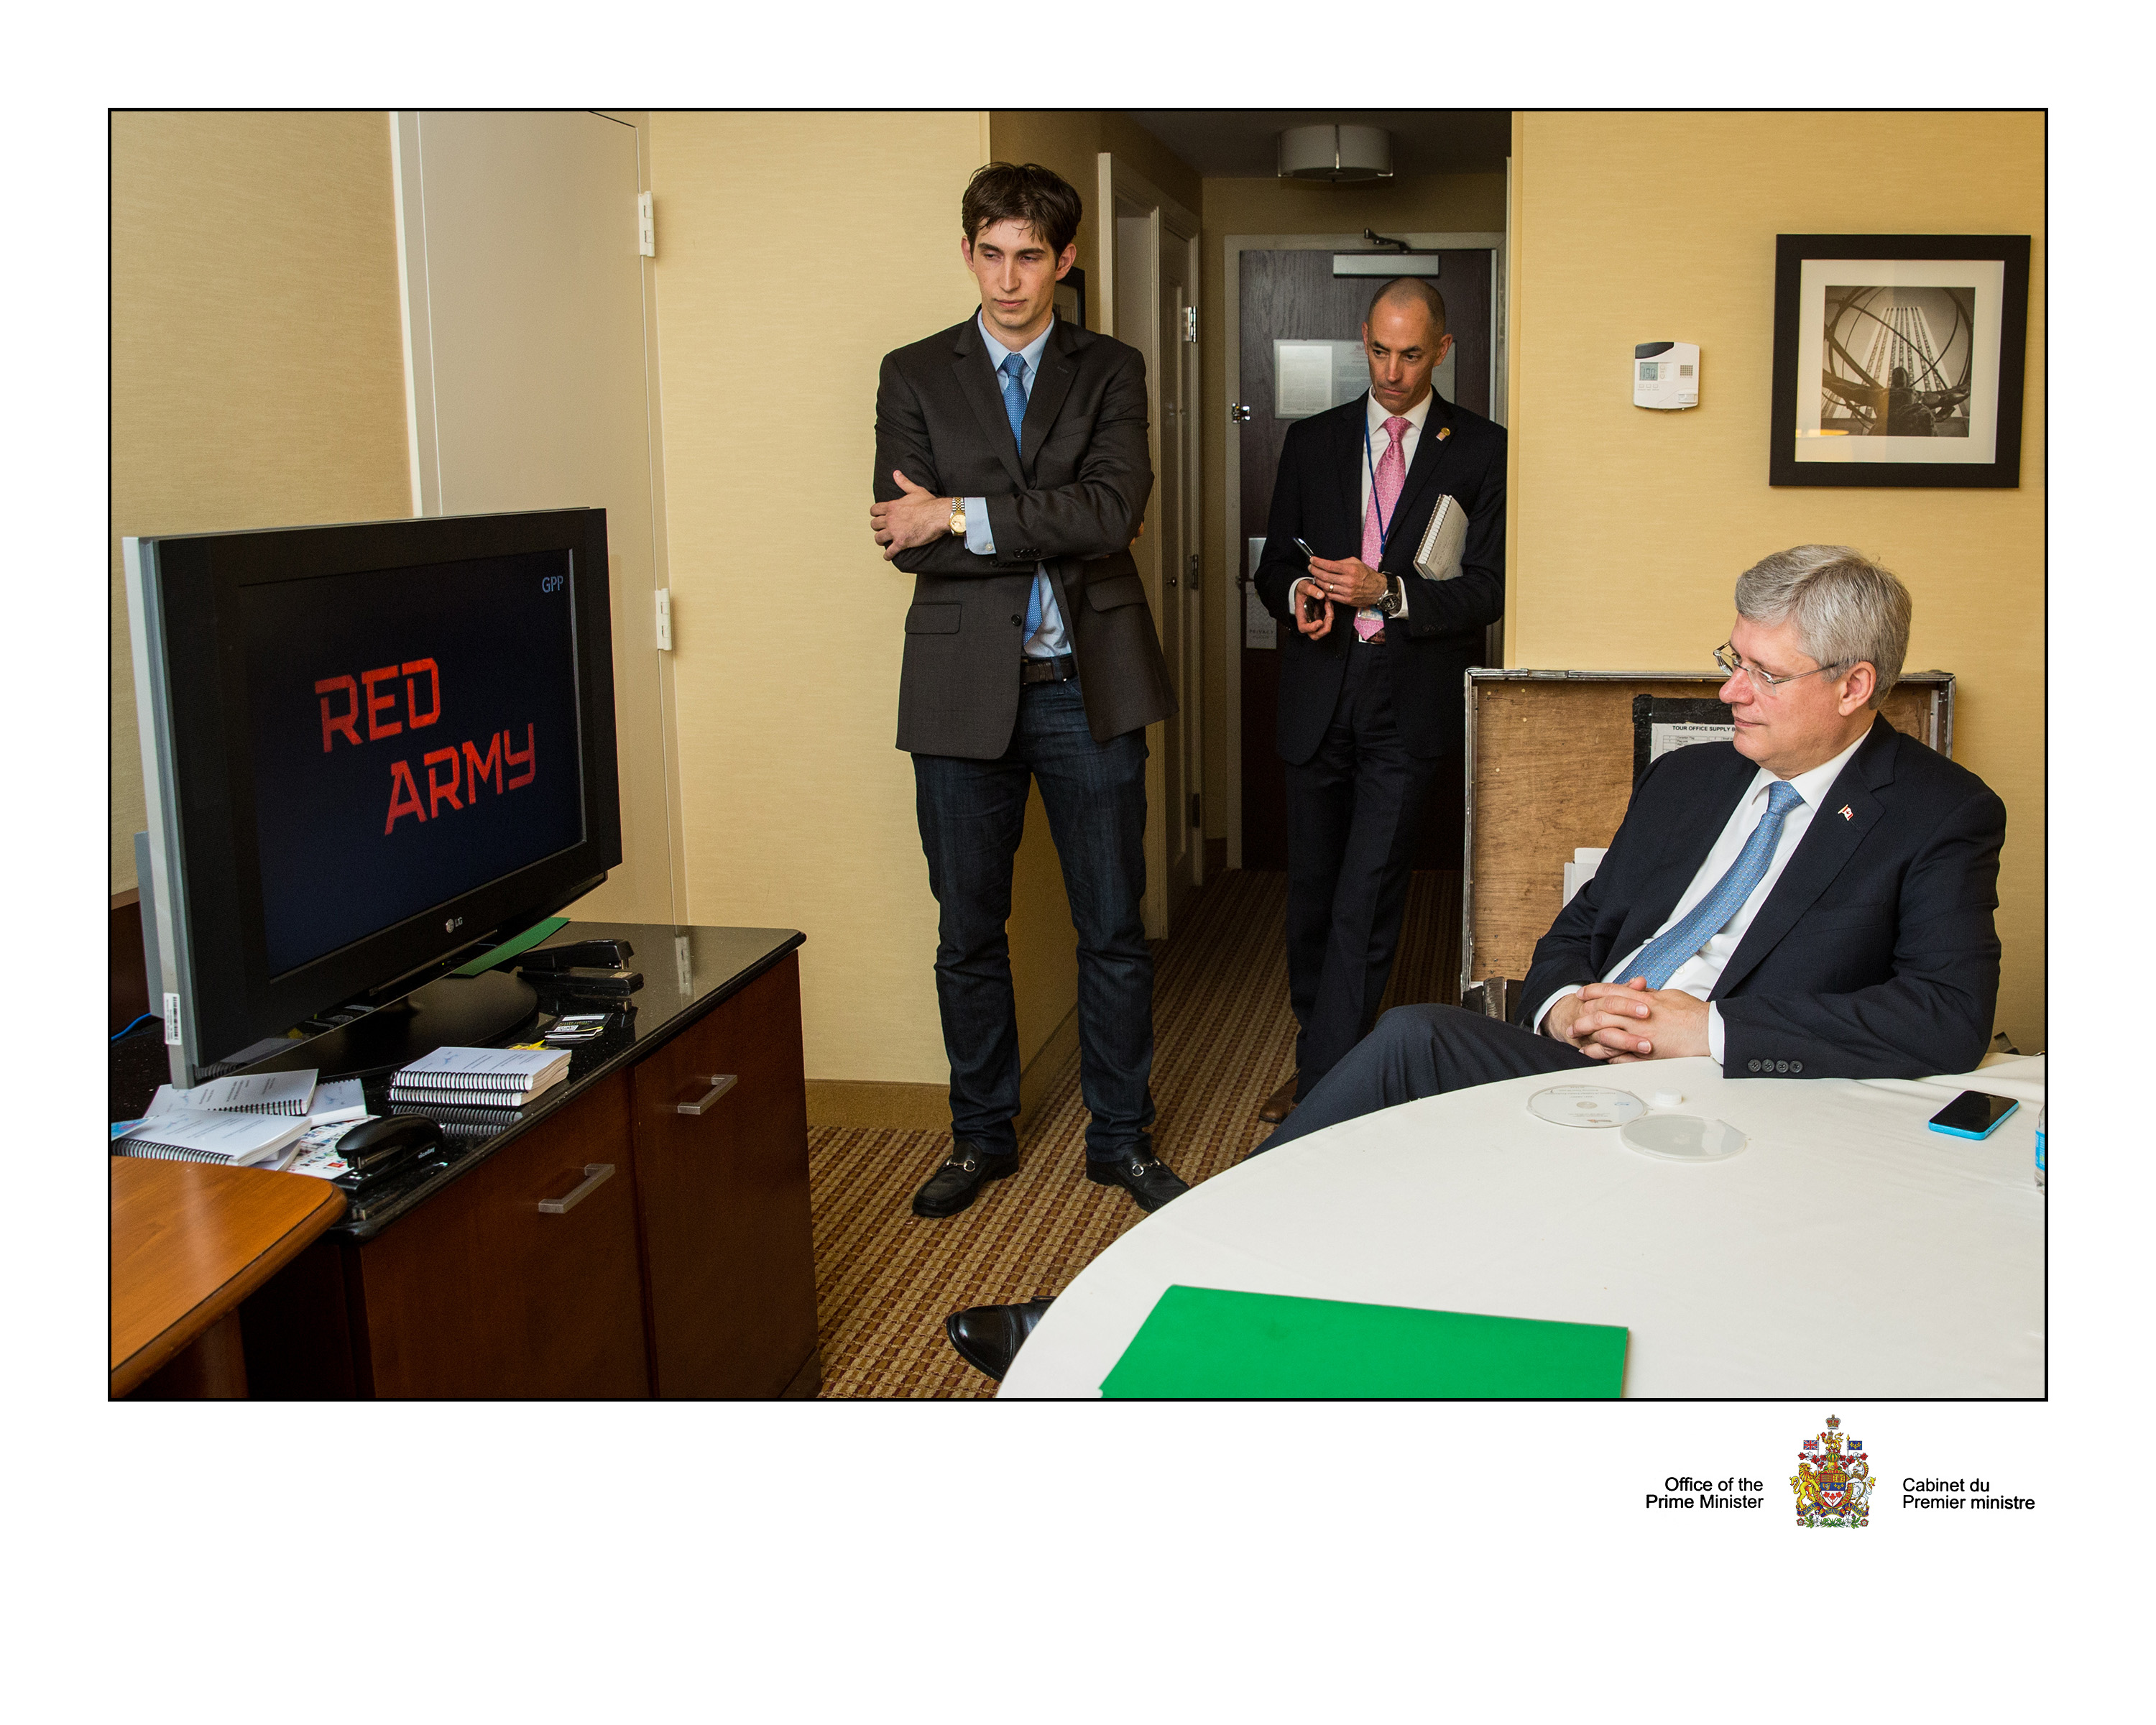 Sean Carey and Canadian Prime Minister Stephen Harper. Personal screening of Red Army in NYC. September, 2014.